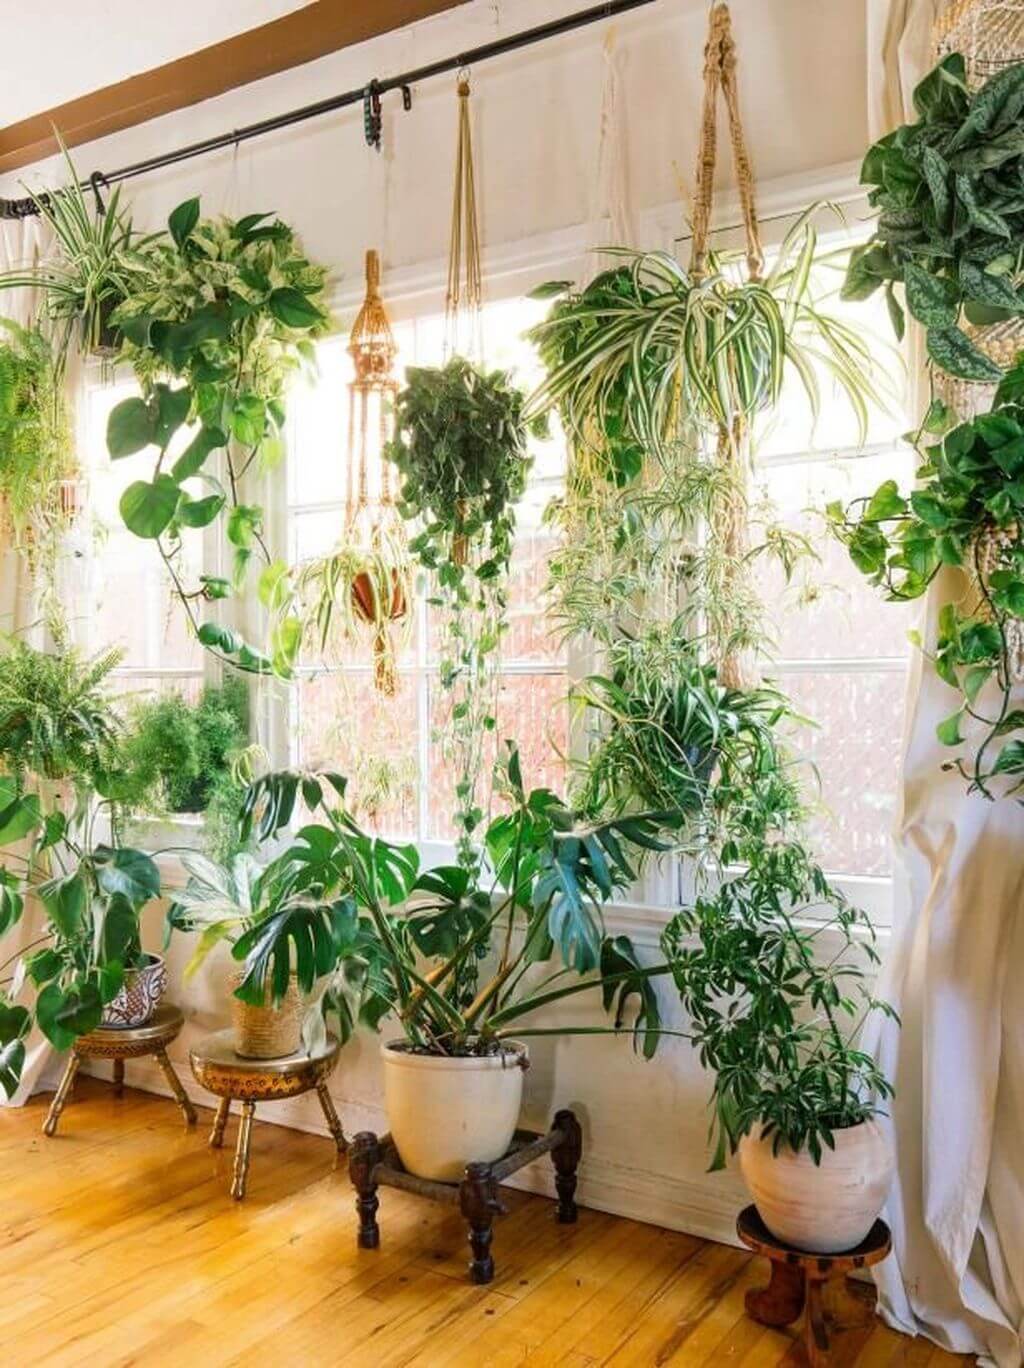 More decor inspirations with plants 2